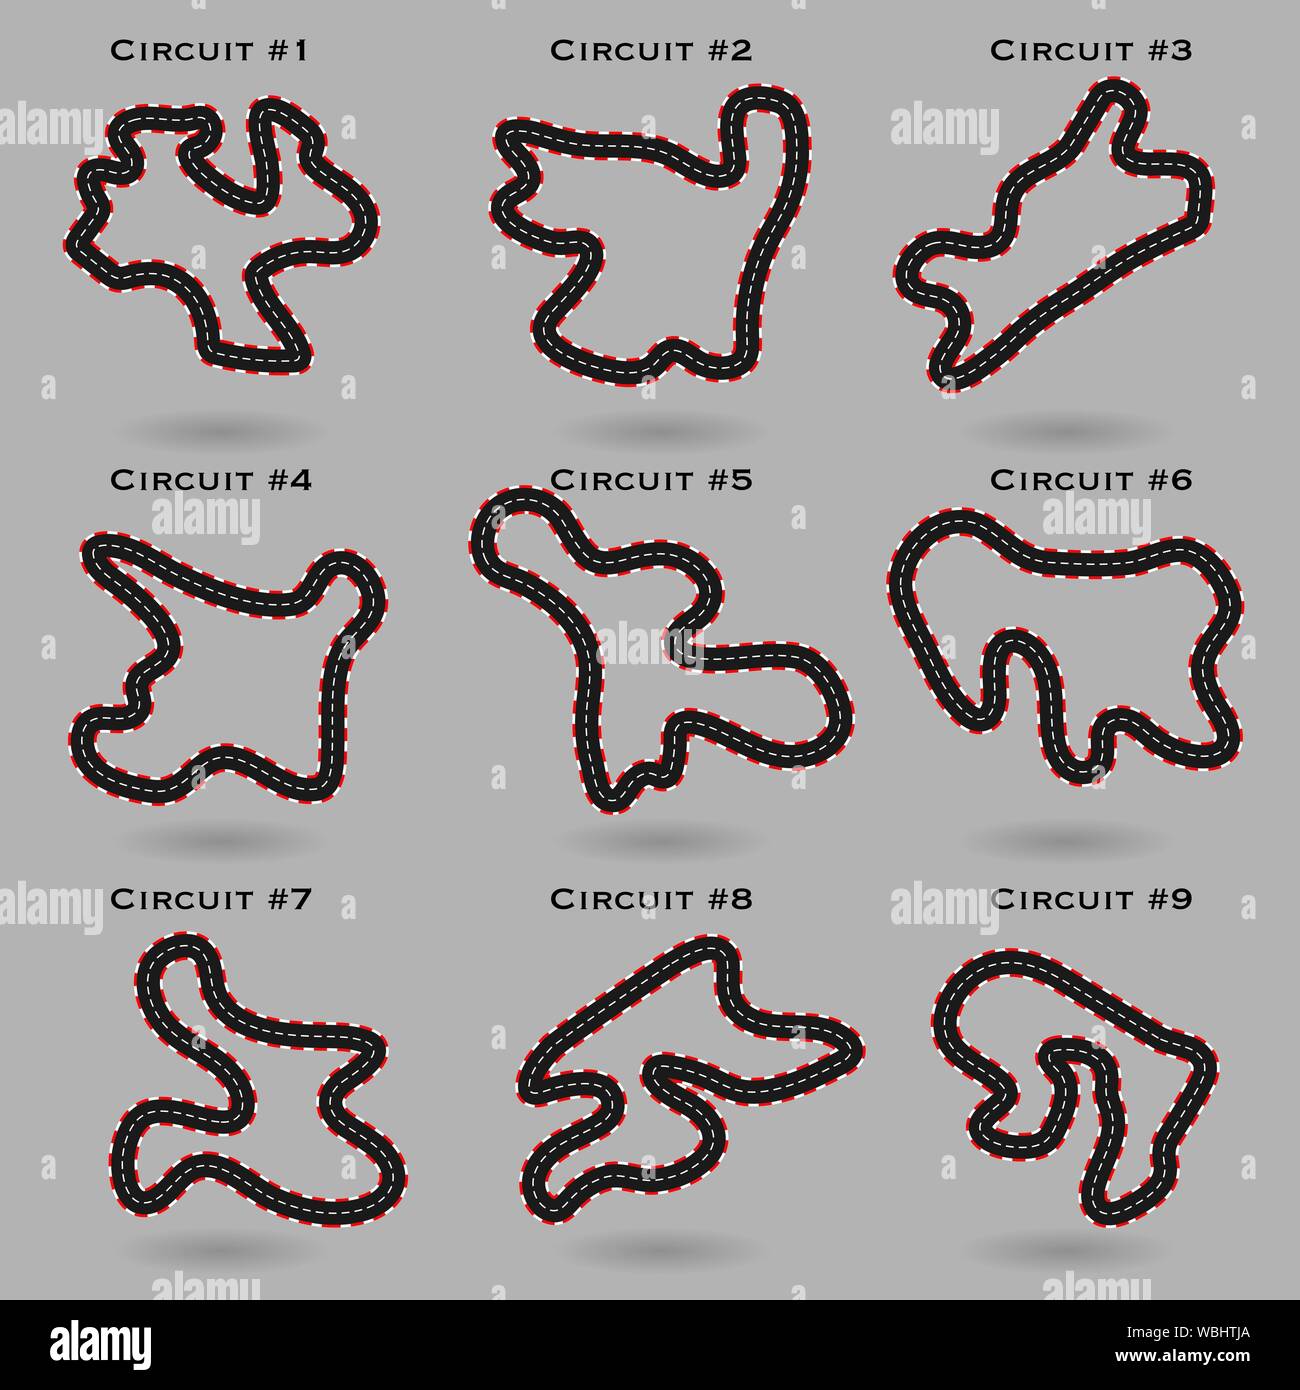 Set of different custom made race track maps with shadows isolated on gray background Stock Vector